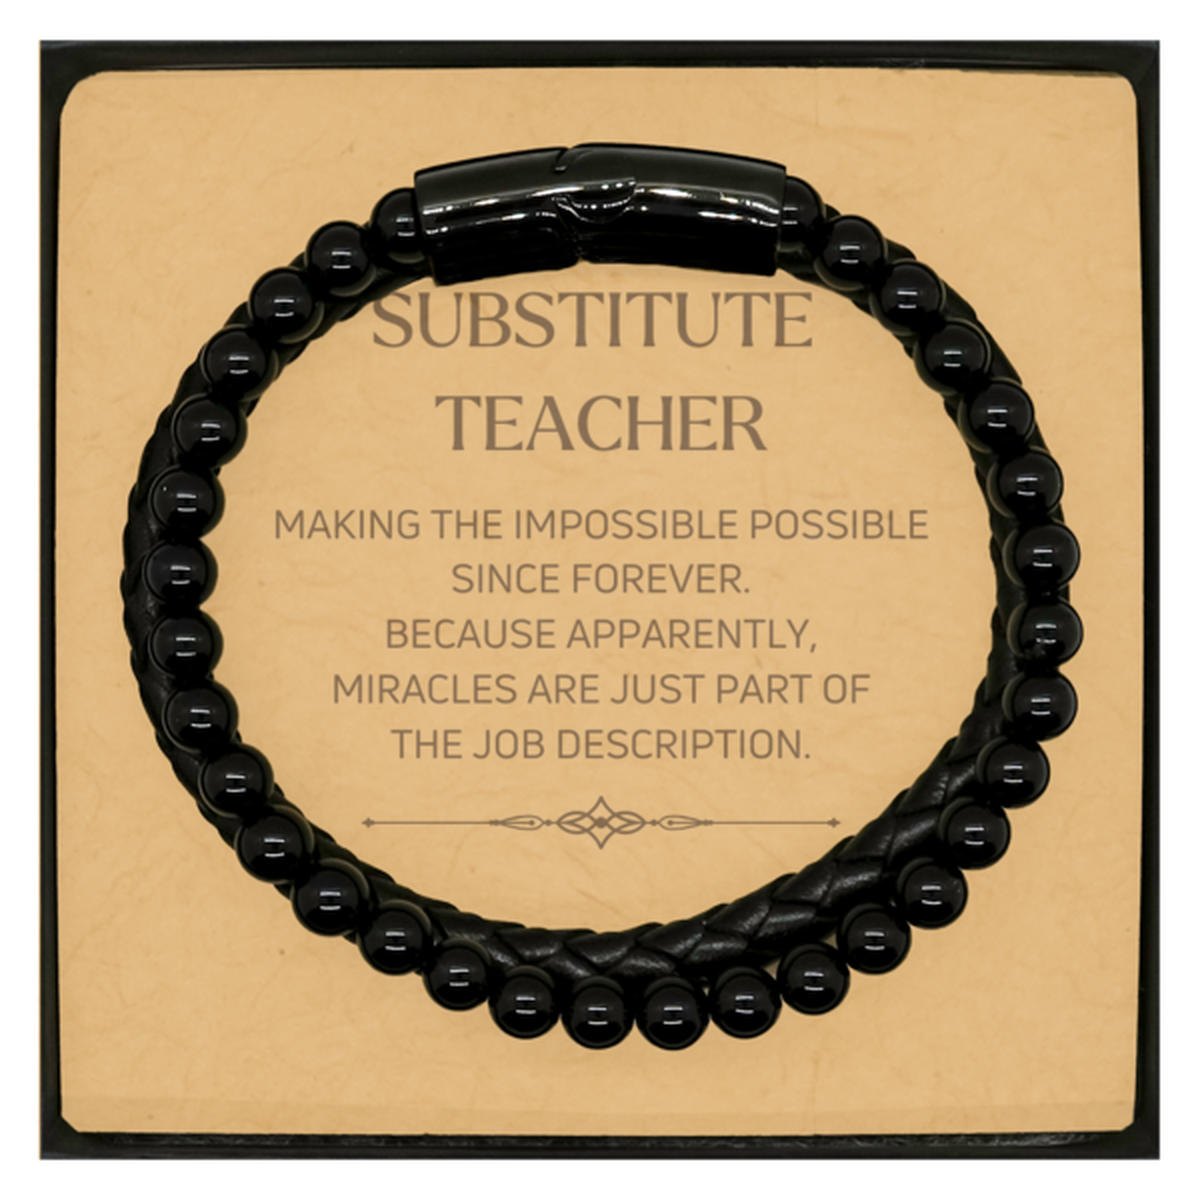 Funny Substitute Teacher Gifts, Miracles are just part of the job description, Inspirational Birthday Christmas Stone Leather Bracelets For Substitute Teacher, Men, Women, Coworkers, Friends, Boss